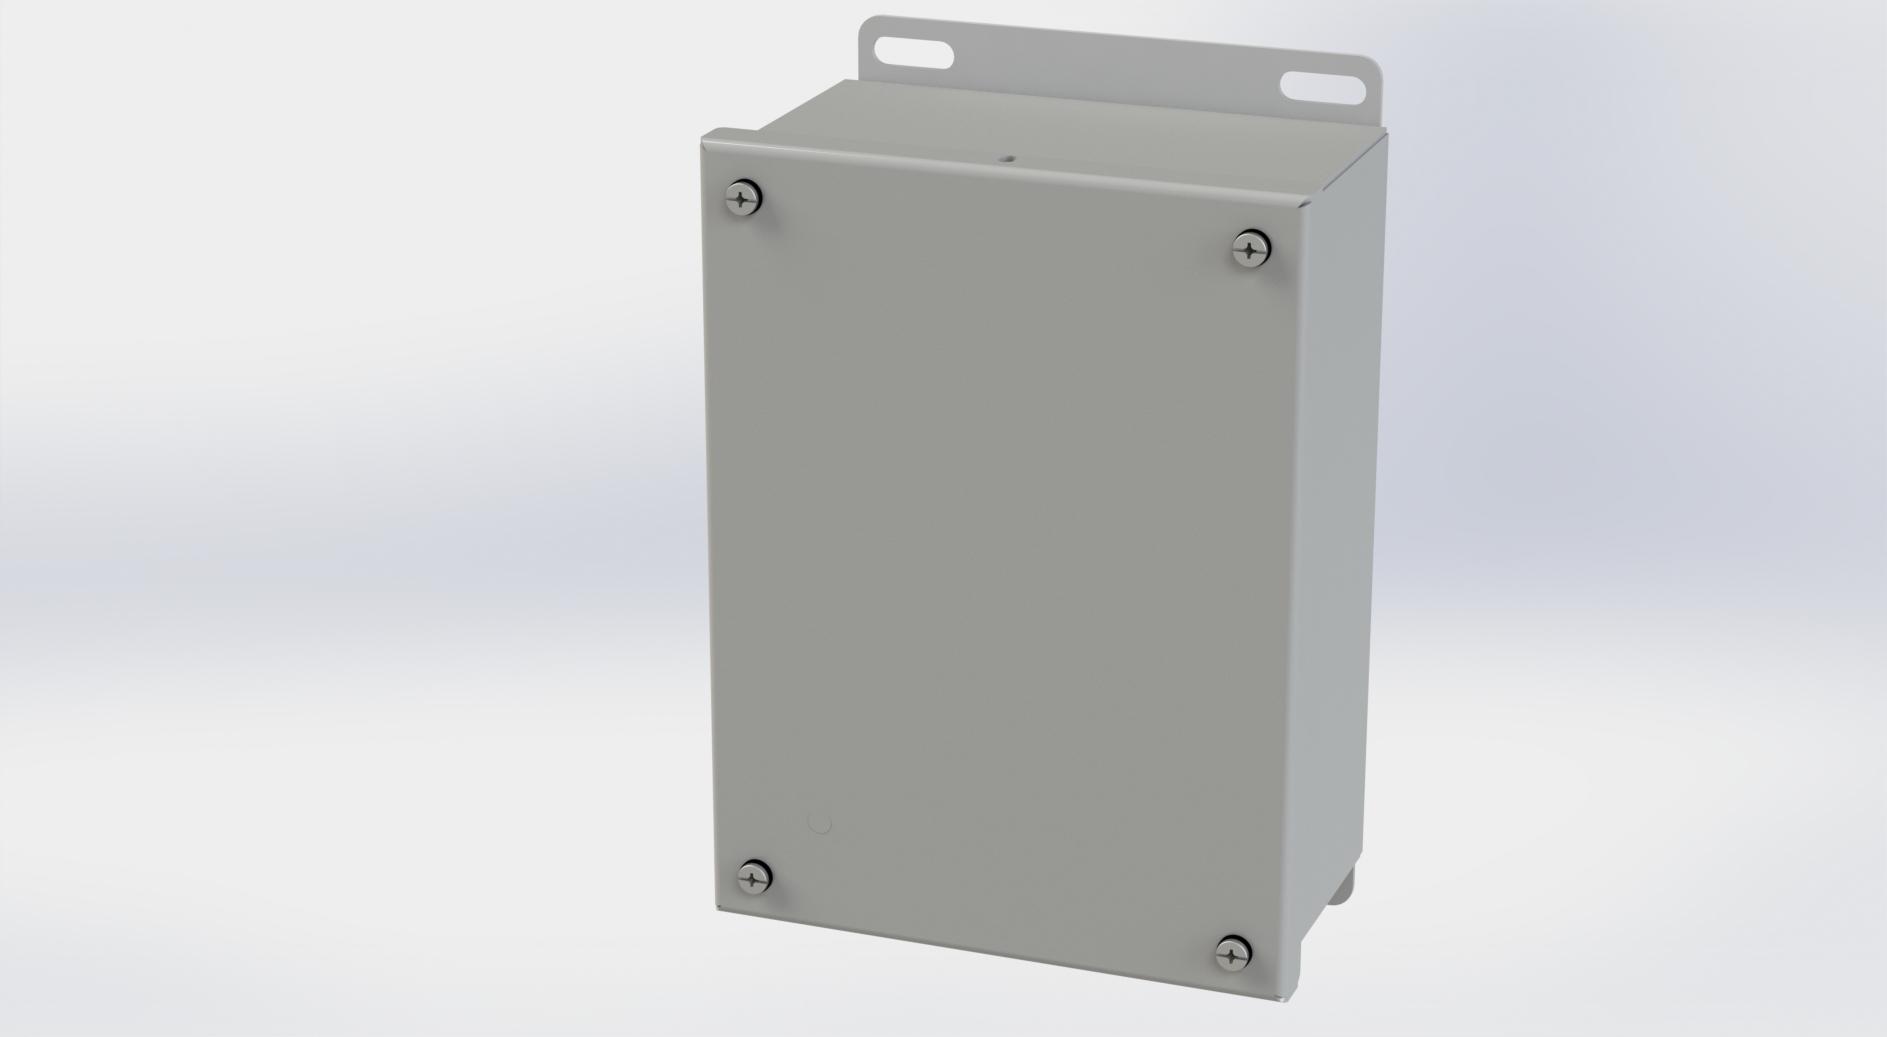 Saginaw Control SCE-806SC SC Enclosure, Height:8.13", Width:6.00", Depth:3.50", ANSI-61 gray powder coating inside and out.  Optional sub-panels are powder coated white.